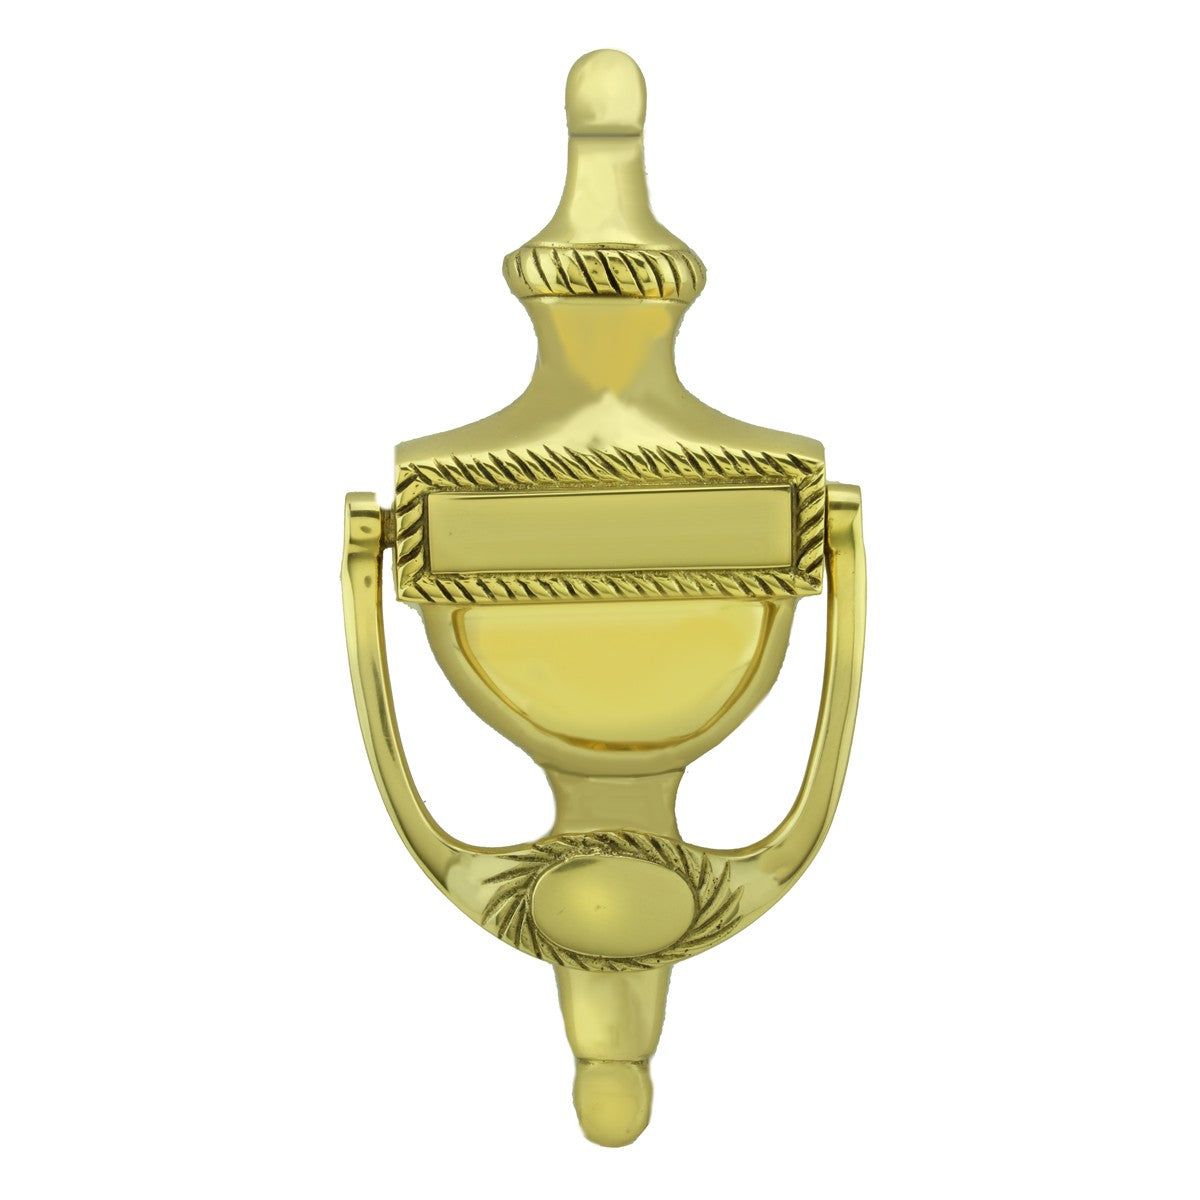 Brass Roped Door Knocker Entry Traditional Design 6.5 Inch. H X 3 Inch. W